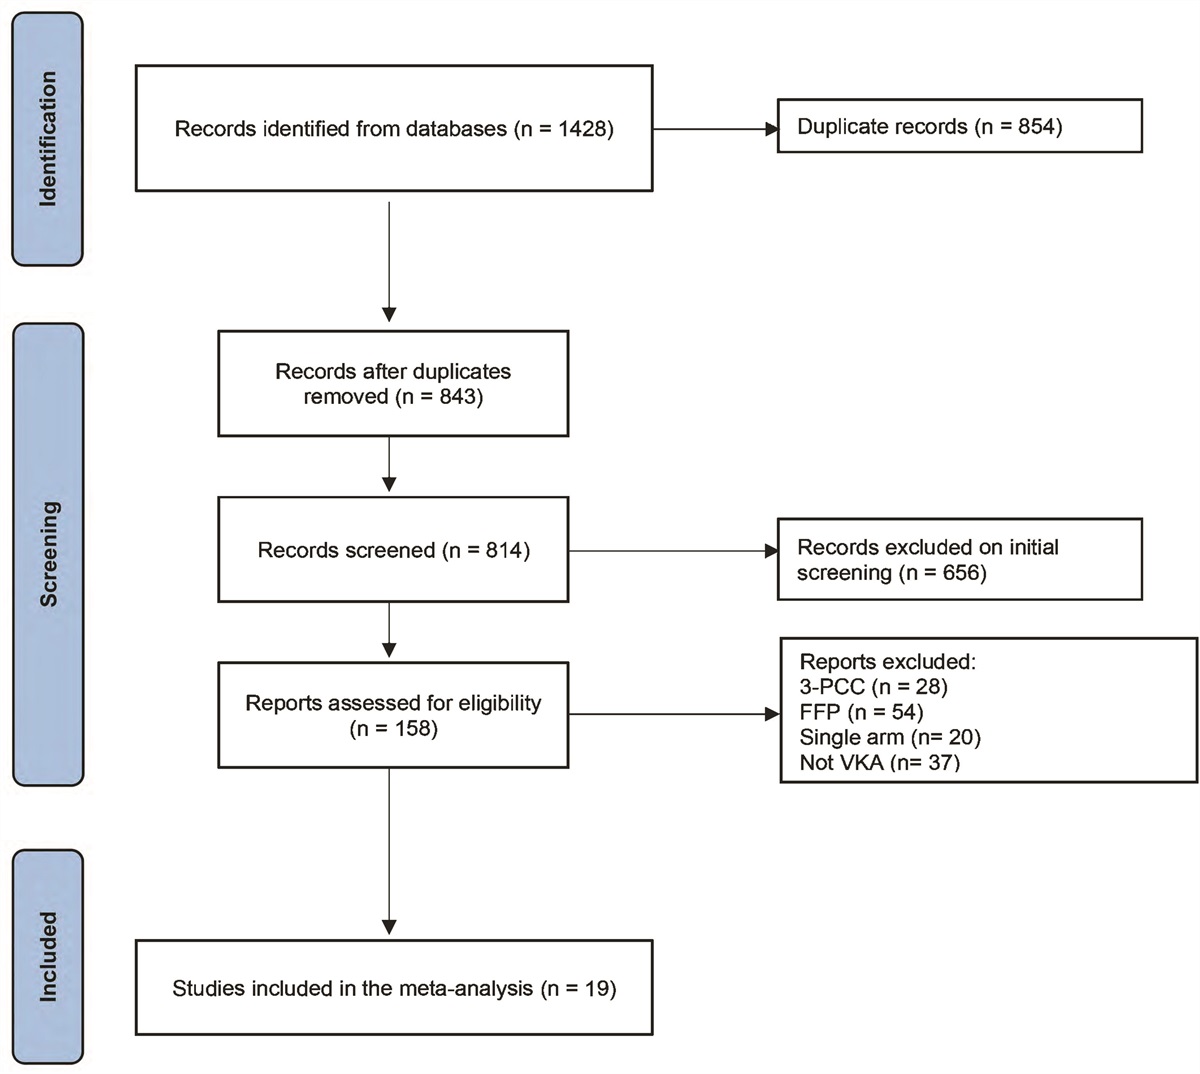 Fixed- Versus Variable-Dose Prothrombin Complex Concentrate for the Emergent Reversal of Vitamin K Antagonists: A Systematic Review and Meta-Analysis